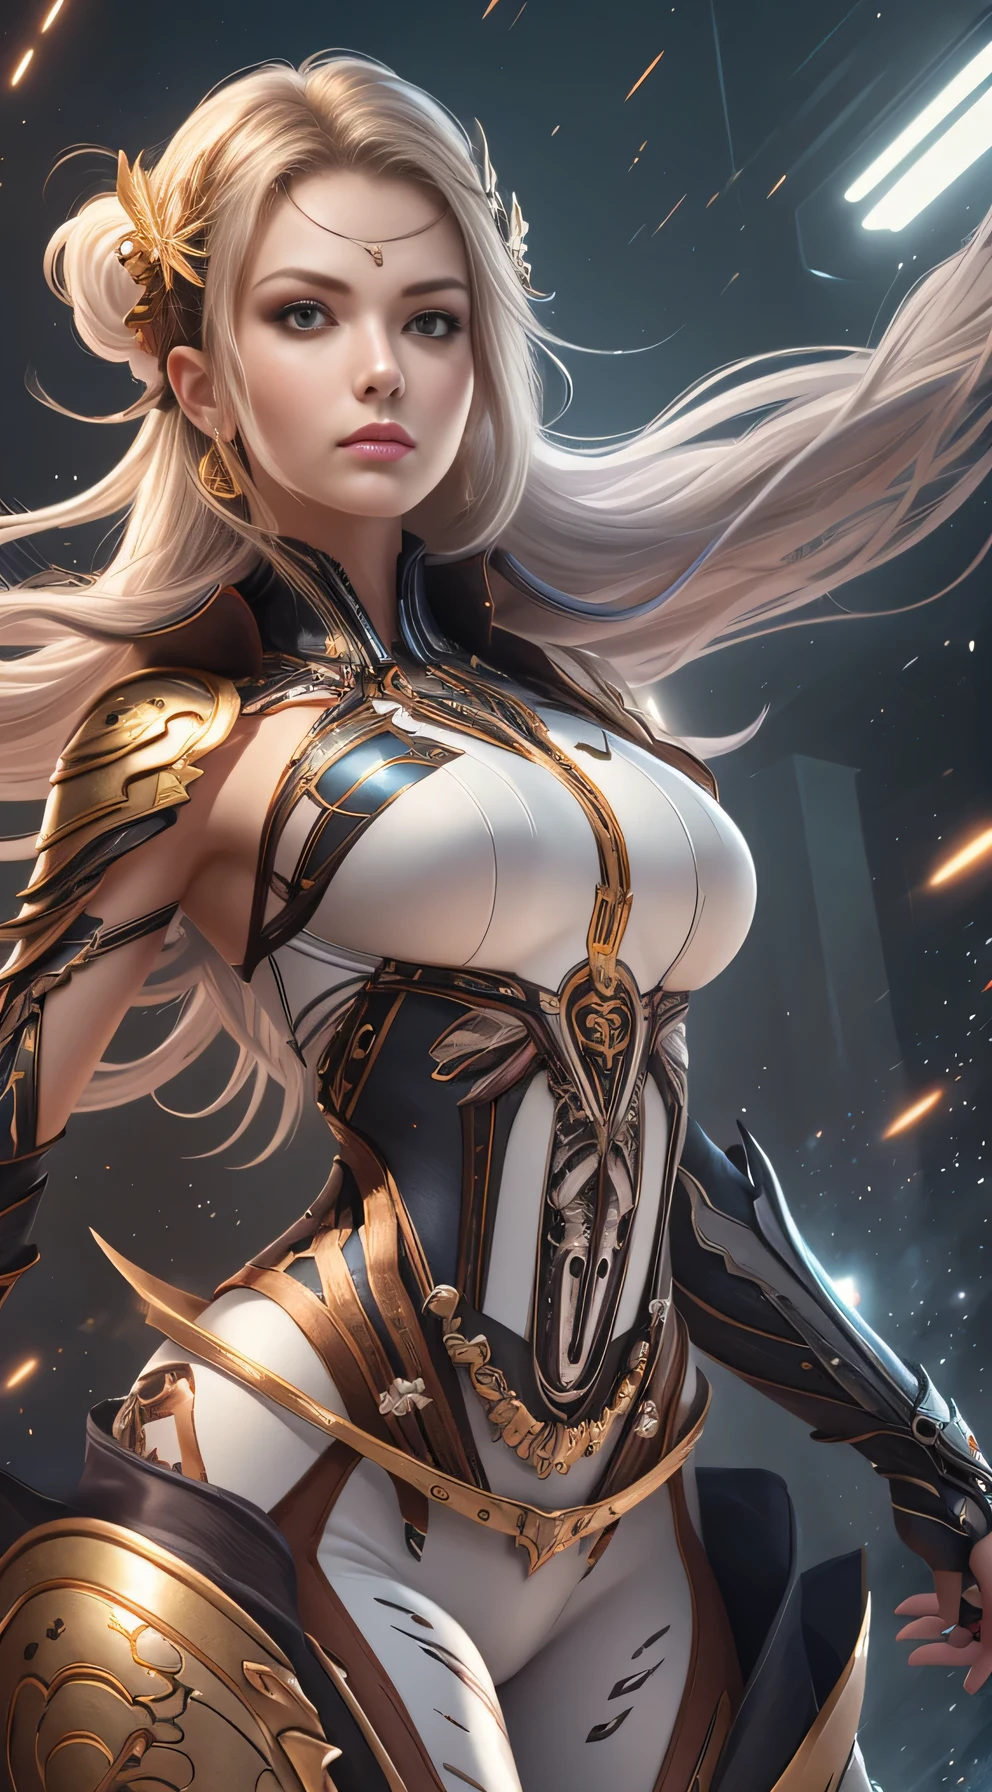 (((Masterpiece))), Ultra high quality, super detailed, 4K highly detailed digital art, Epic strong female warrior from the future, Fierce woman, white outfit, (Strong whole body pose), (stunning exotic beauty), Brazilian beauty, Very athletic, (muscular woman),((Wearing white biomechanical armor)), (Soft white clothes underneath the armor), Golden outlines on armor, armor shining, (white biomechanical armor), armor glimmering, neon lights on armor, Ultra athletic warrior woman from other galaxy, (white bodysuit armor), (skin tight bodysuit), white clothes (white armor), (muscular body), ((She has a katana)), she is glimmering and sparkles all around her, her beauty is out of this world, ultra beautiful, detailed face, Her mighty and all power is shining through her being, she is a warrior to defend the weak and empowering the feminine, Feminine empowerment, she is galaxy rider, Astronomical galaxy backround far far away from the earth where the mythological creatures live. She is hovering over the ground on a far away planet. Her strength is showing even the ground is shaking, HDR (High Dynamic Range), PBR Textures, Super Resolution, Multi-layer Textures